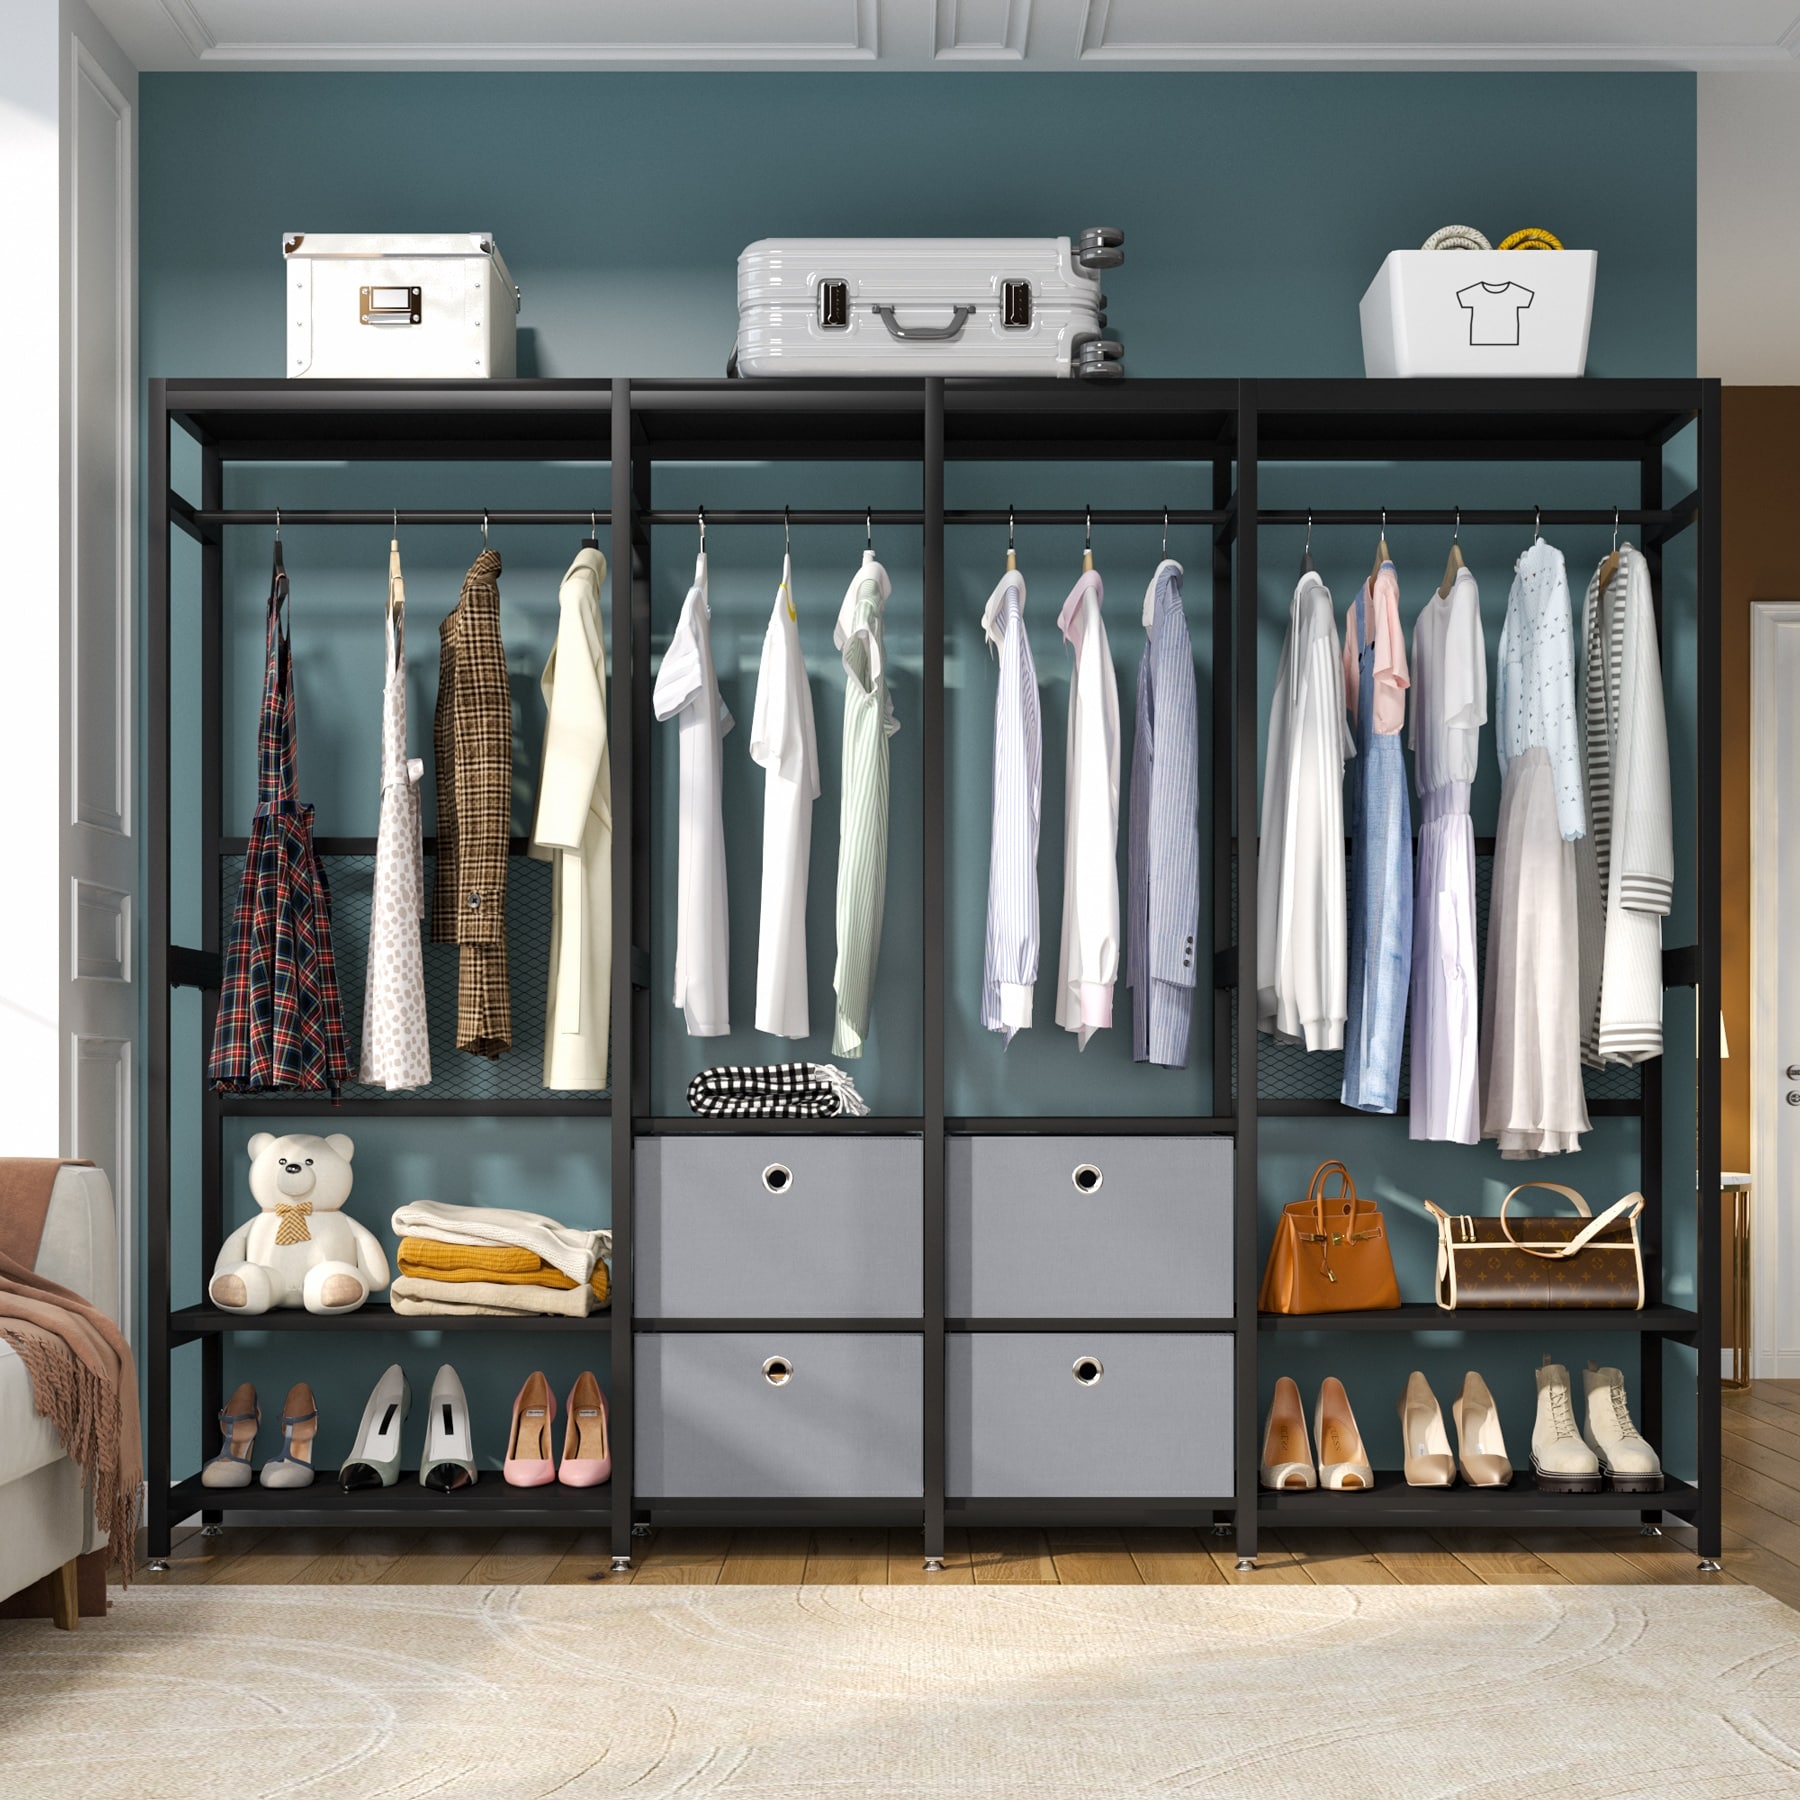 Extra Large Freestanding Closet Organizer with Shelves and Hanging Rods -  On Sale - Bed Bath & Beyond - 35268339